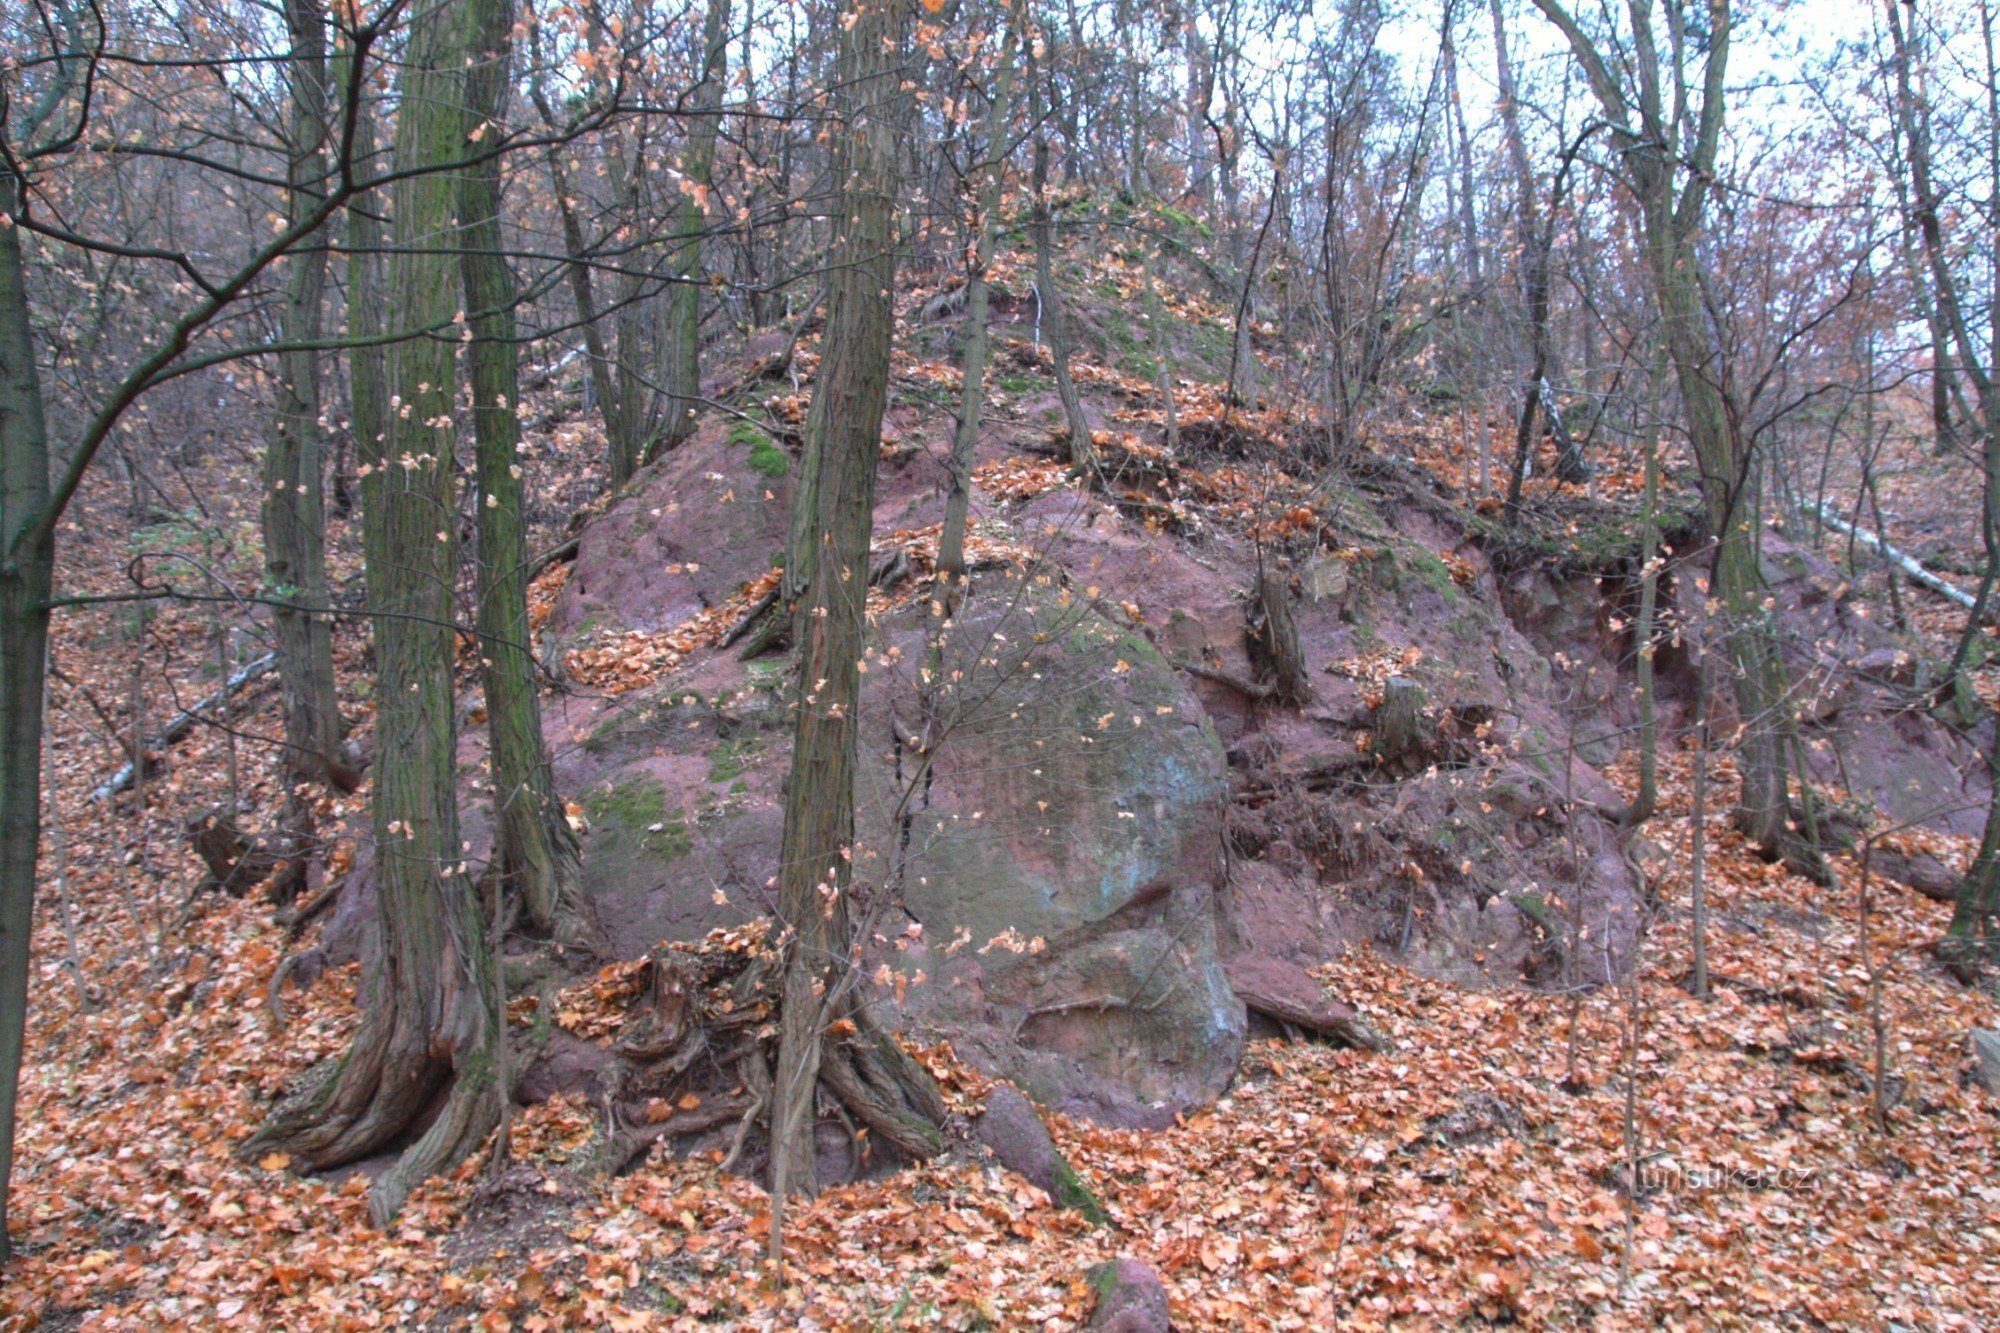 Red conglomerate rocks in the Mahenova straň protected area